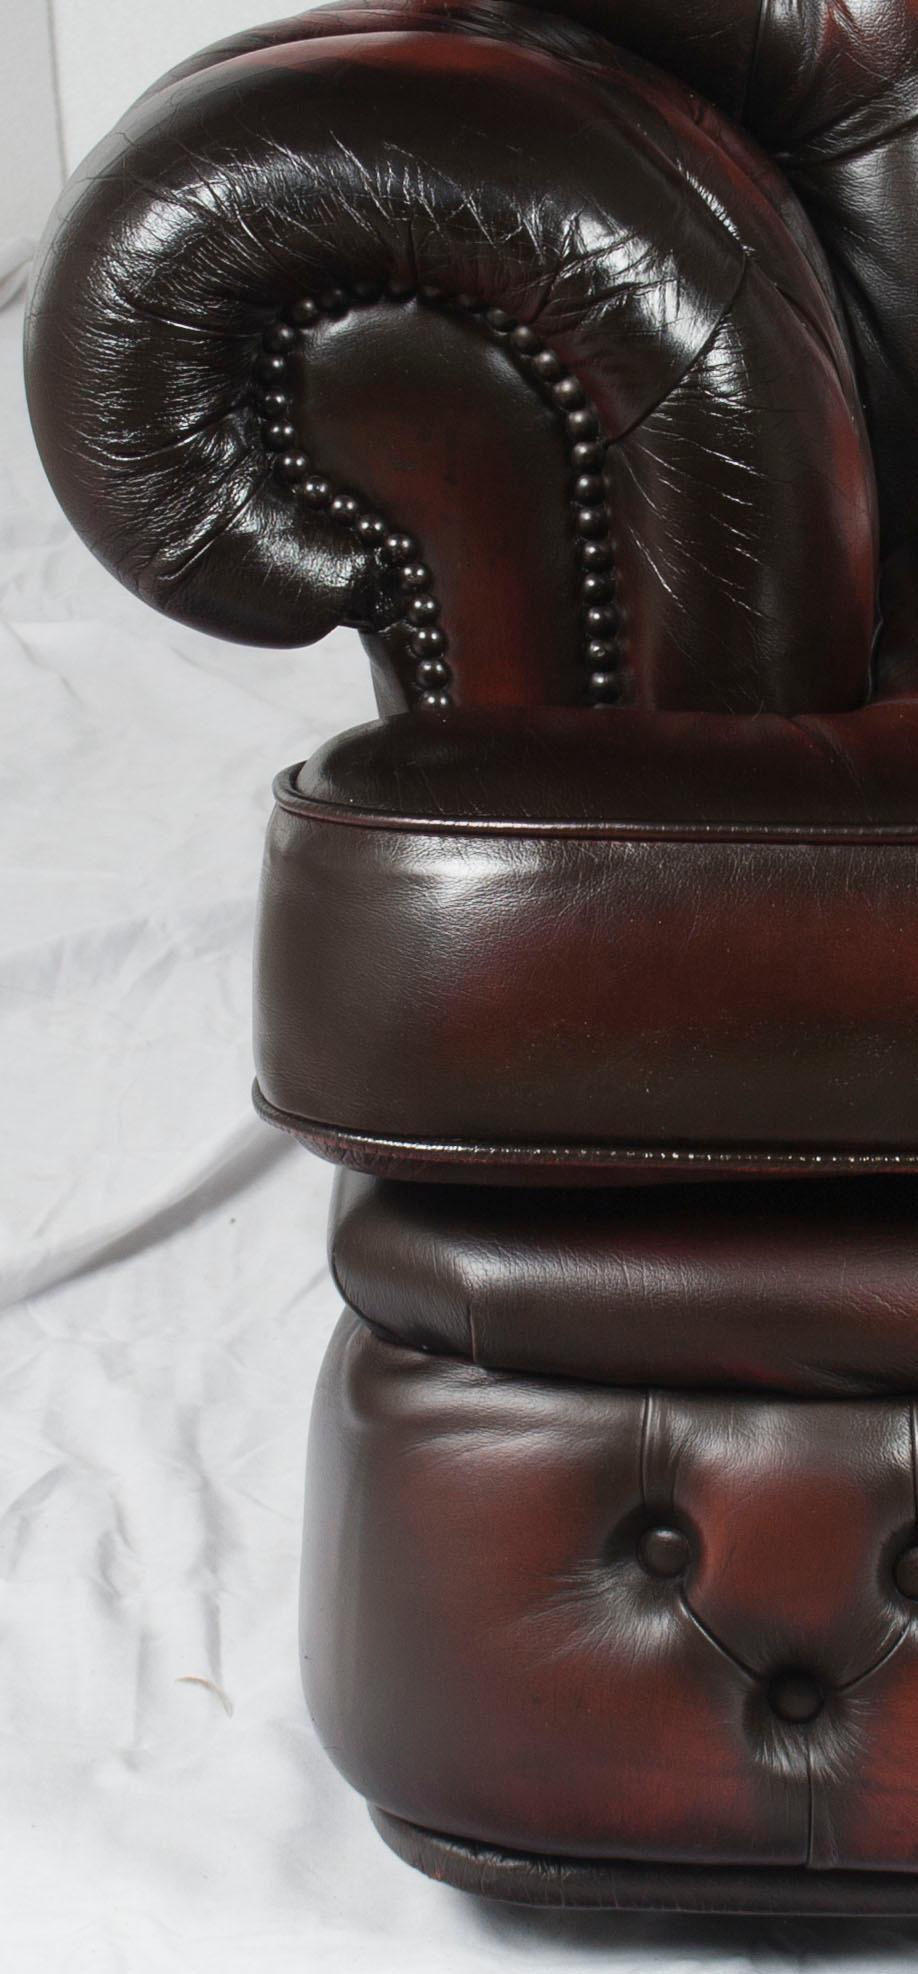 English Tufted Red Leather Tall Back Monk's Style Chesterfield Sofa Couch In Good Condition For Sale In Atlanta, GA